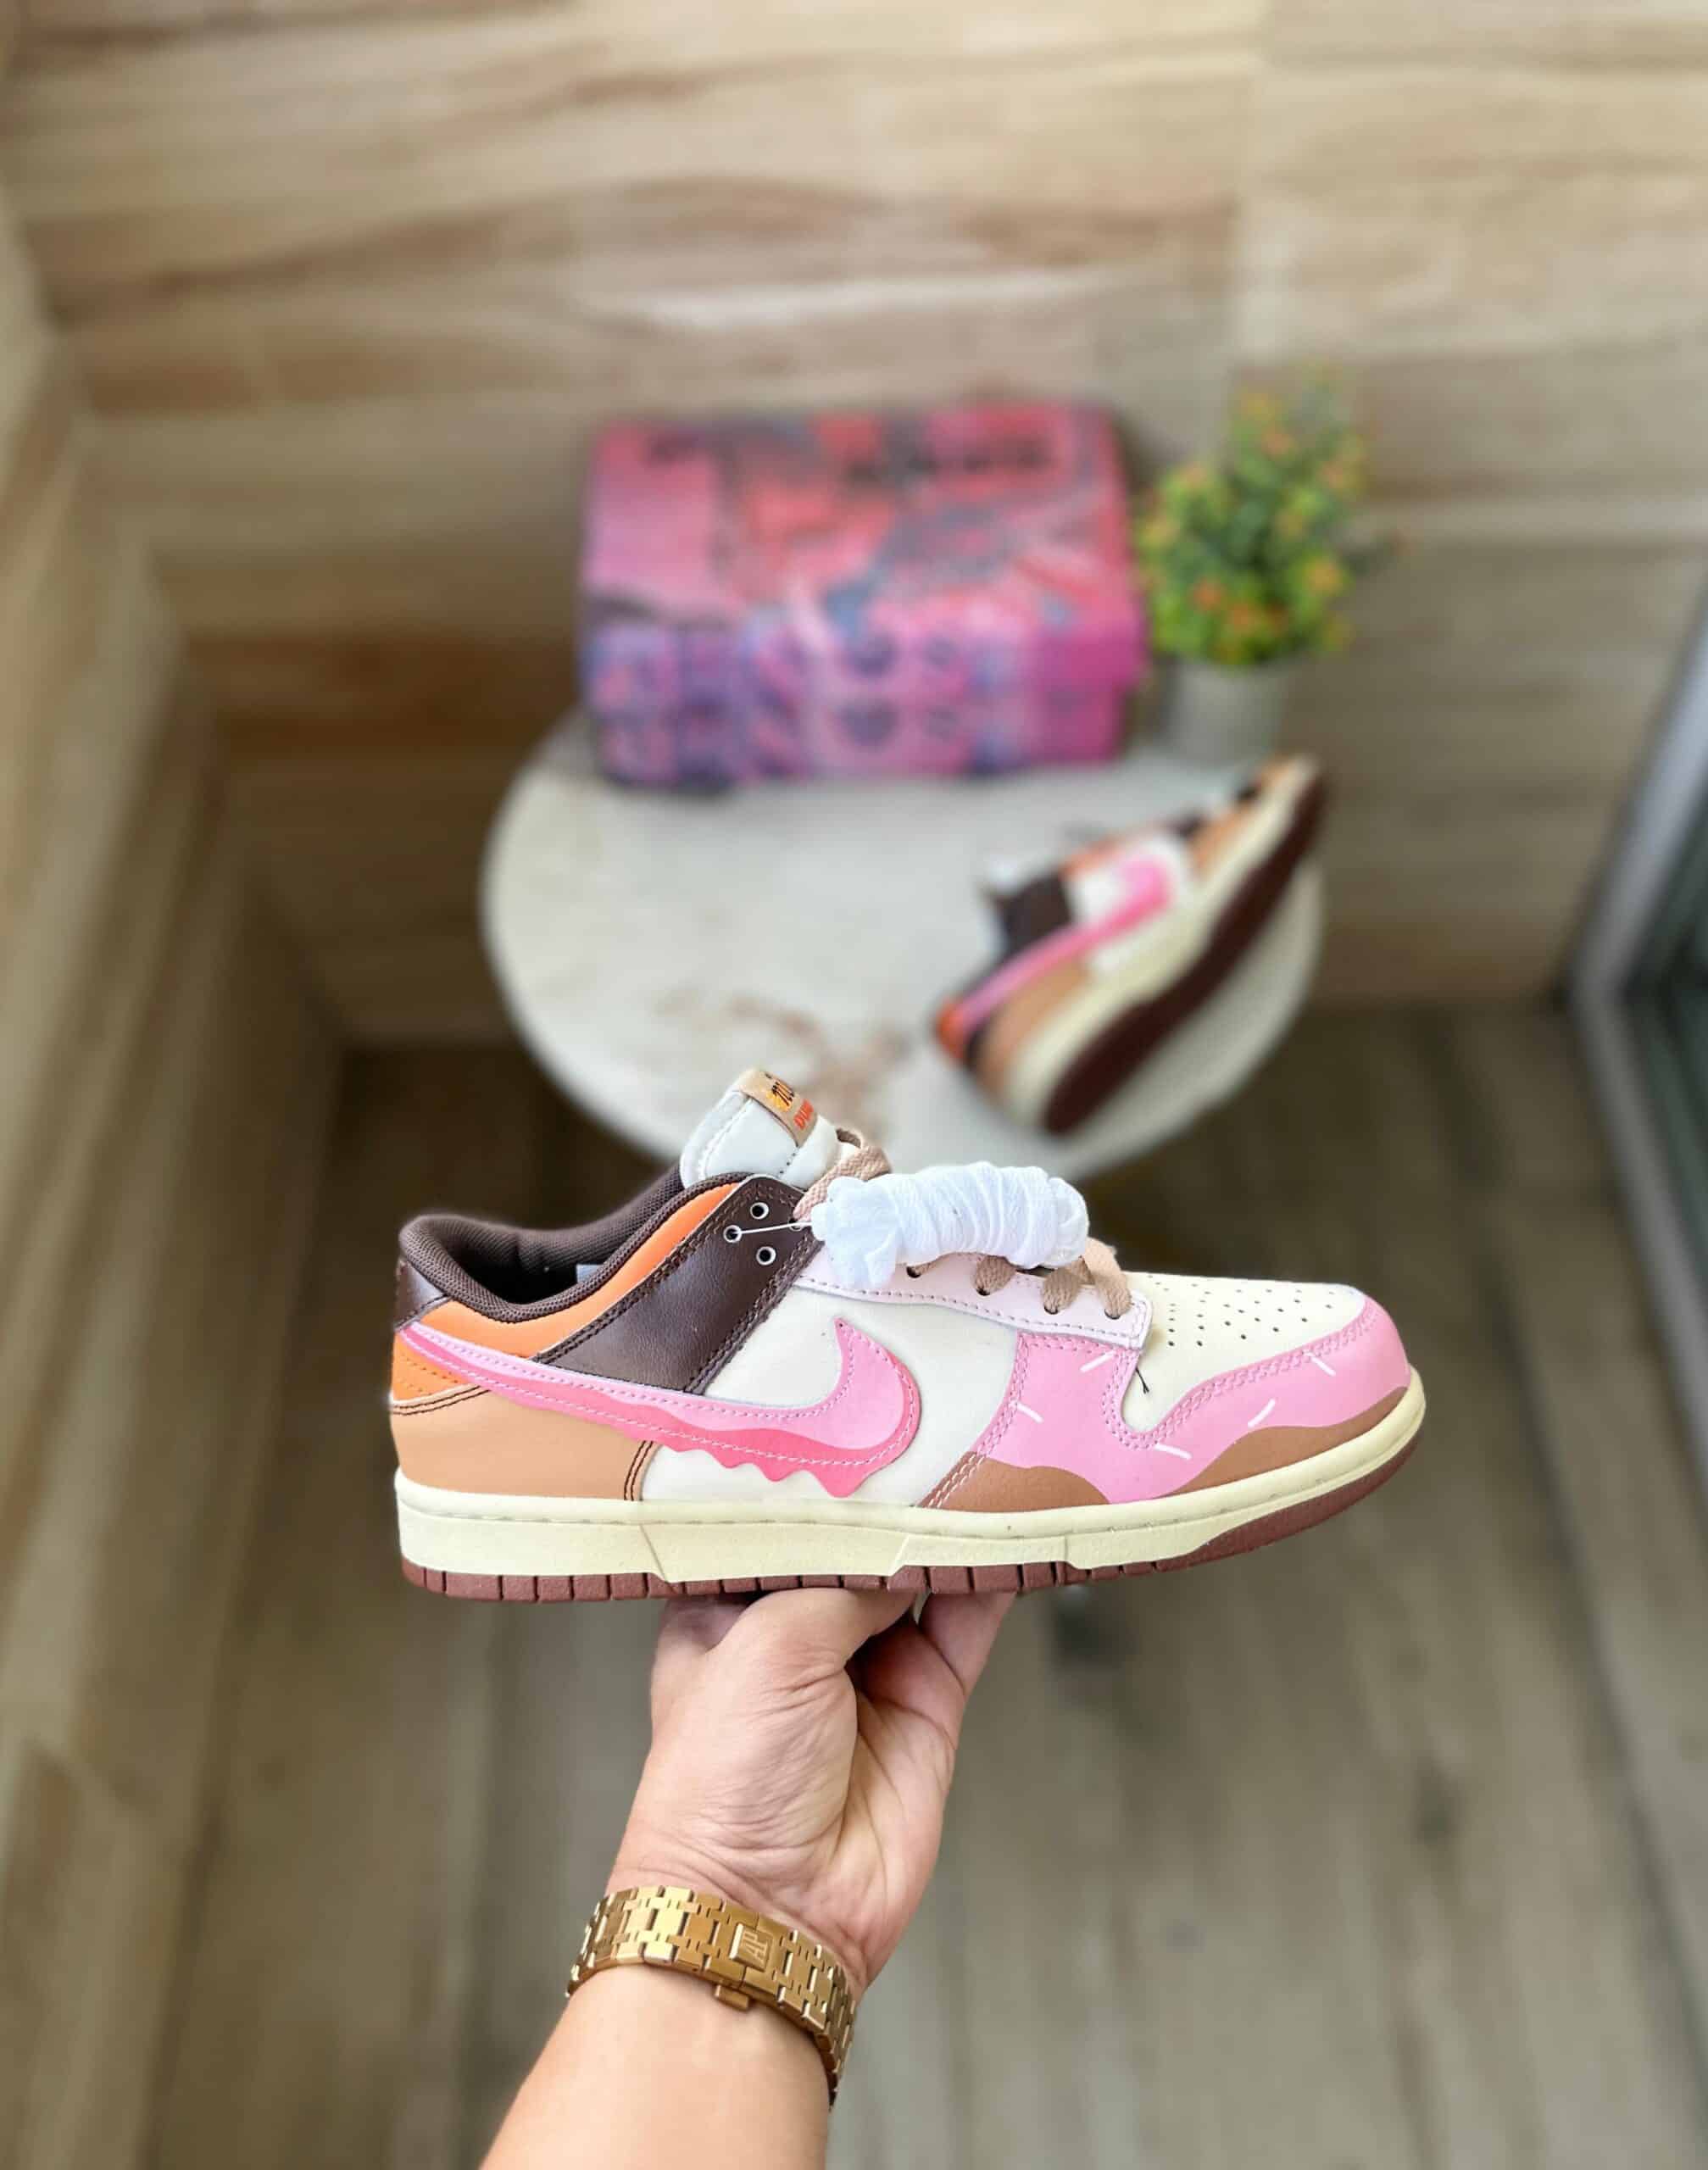 SB Dunk Dunkin Donut Sneakers Limited Stock